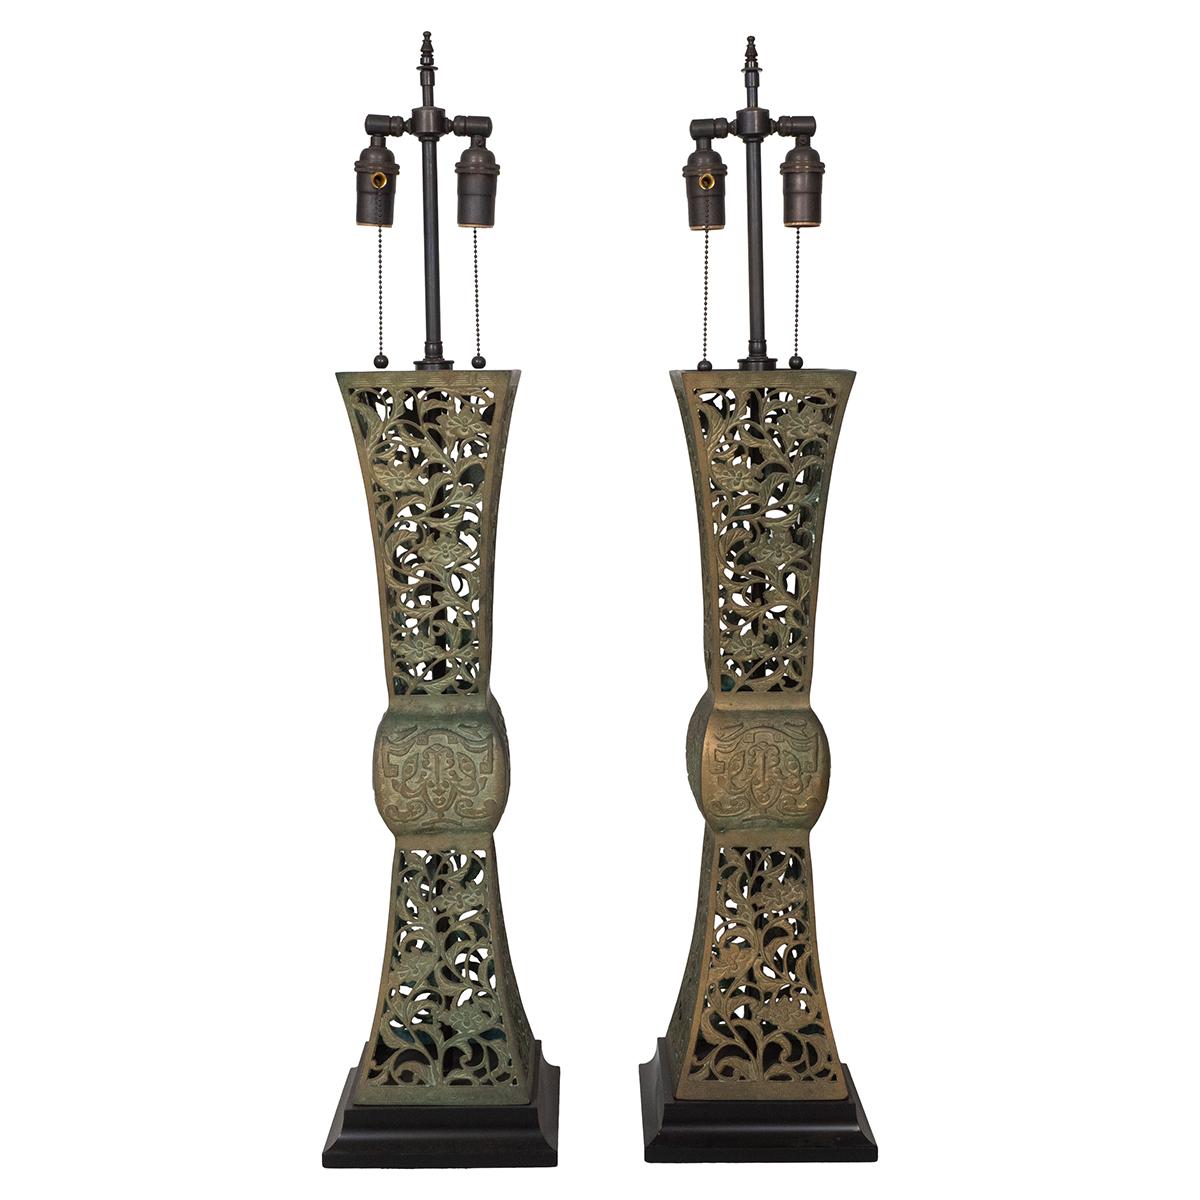 Pair of openwork patinated bronze table lamps on black wood bases.